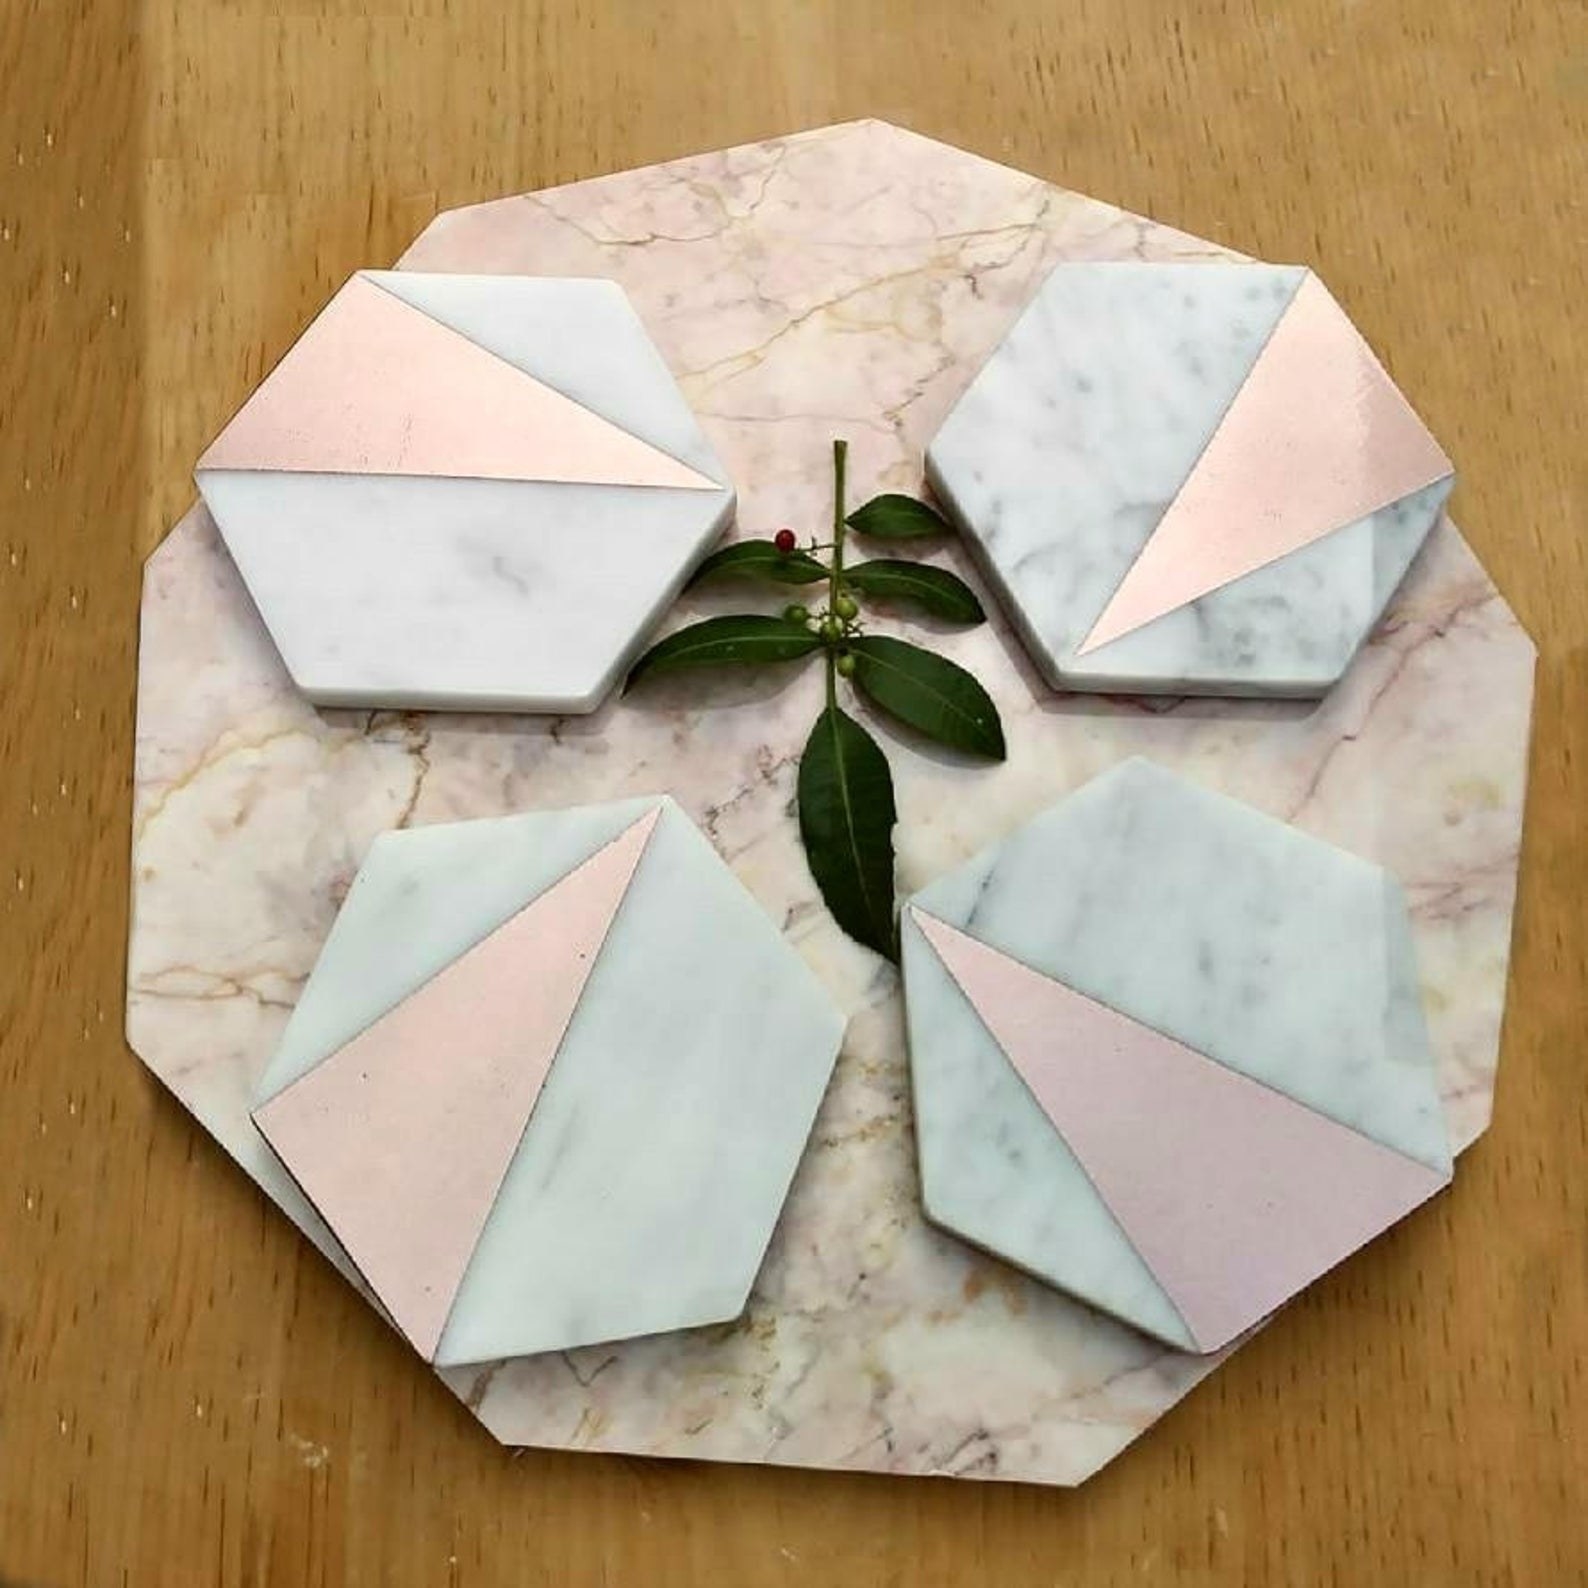 Four rose gold coasters placed on table